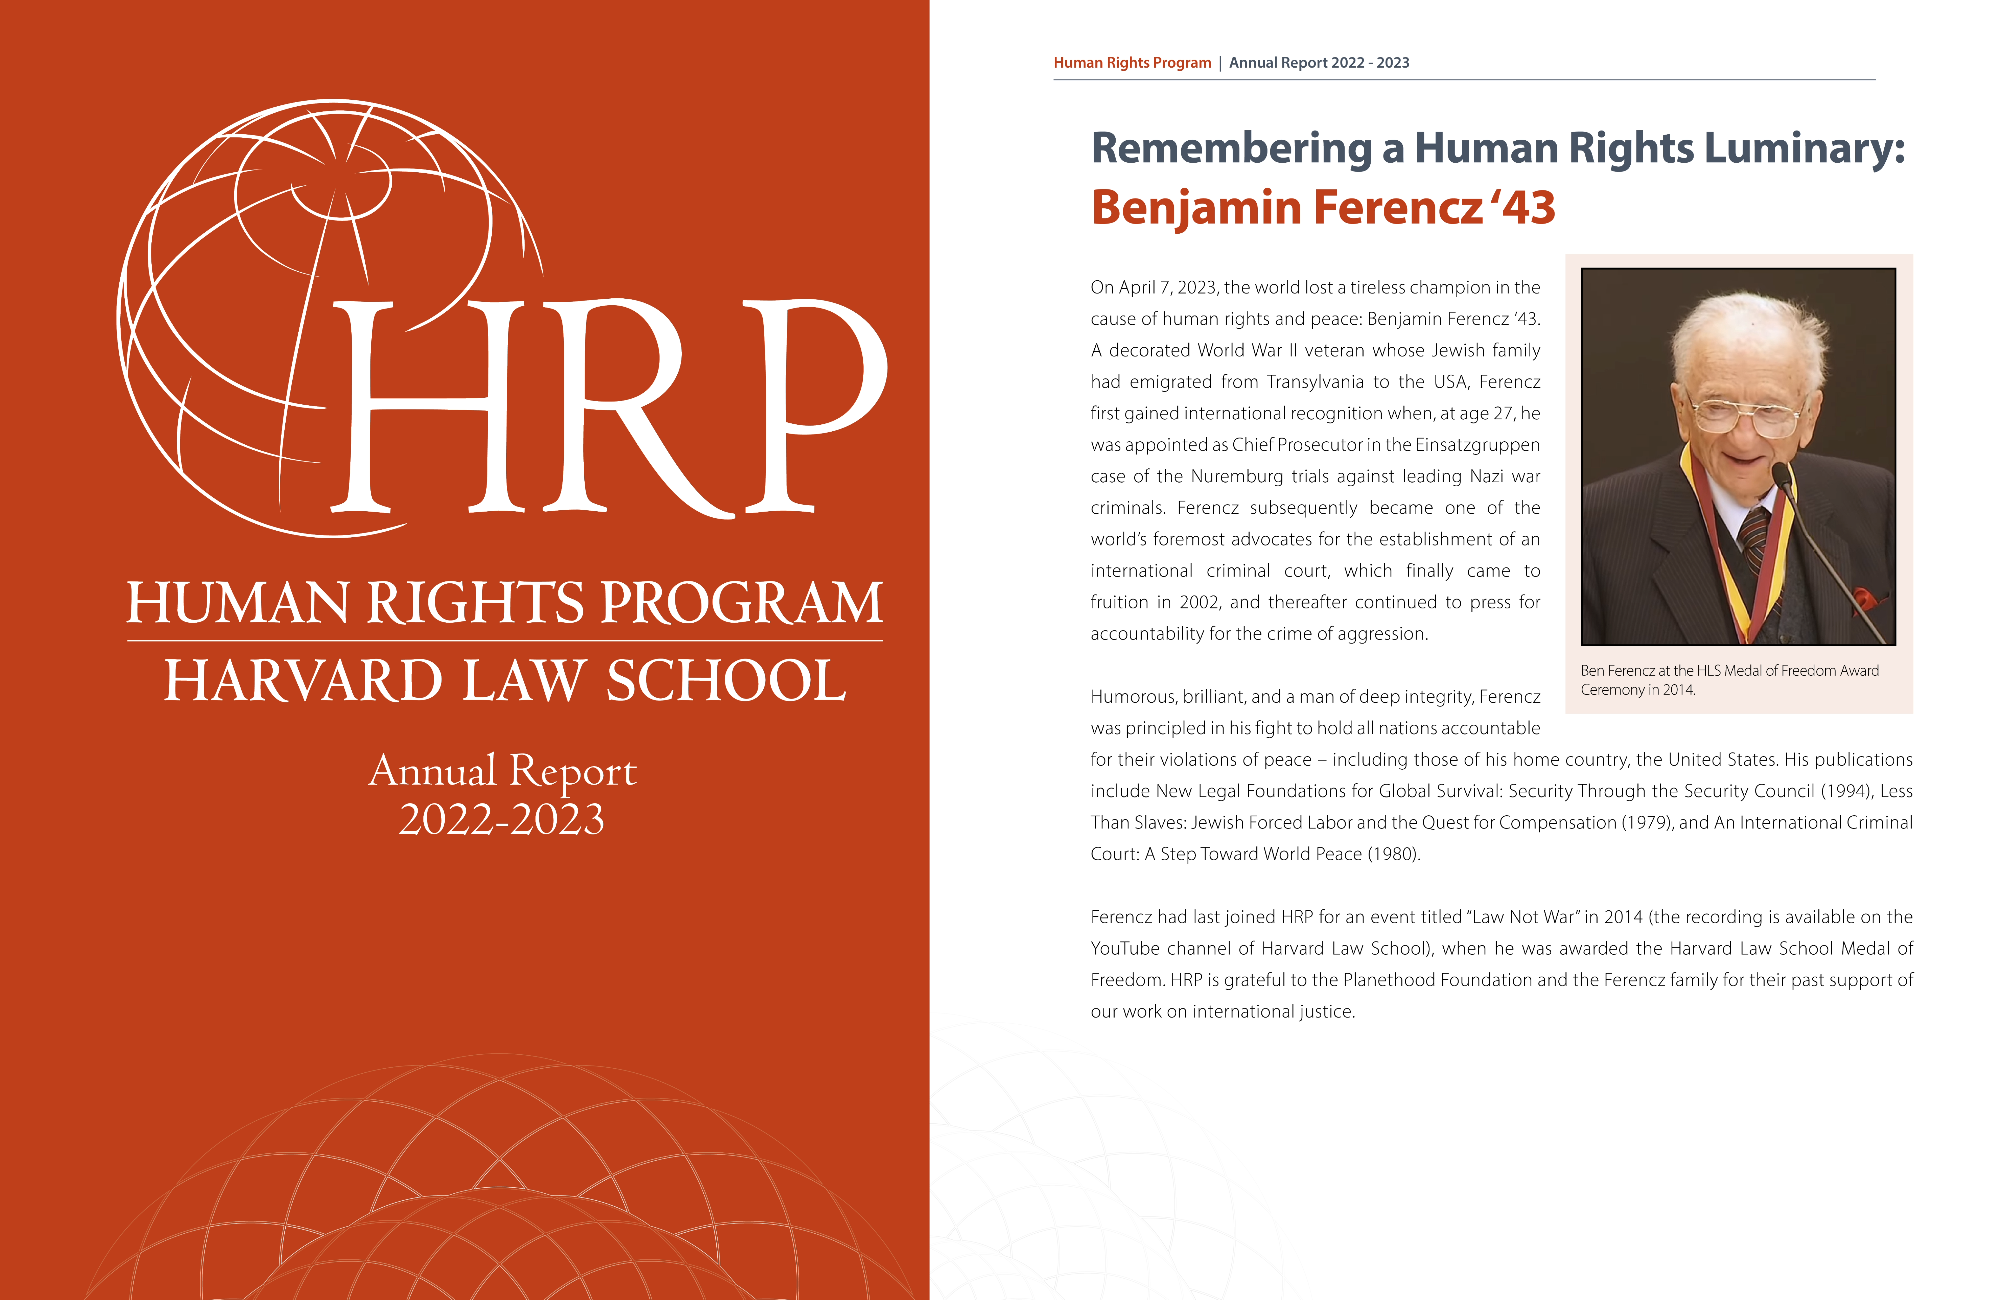 2022-2023 HRP Annual Report cover page - an orange background with the HRP logo in white.